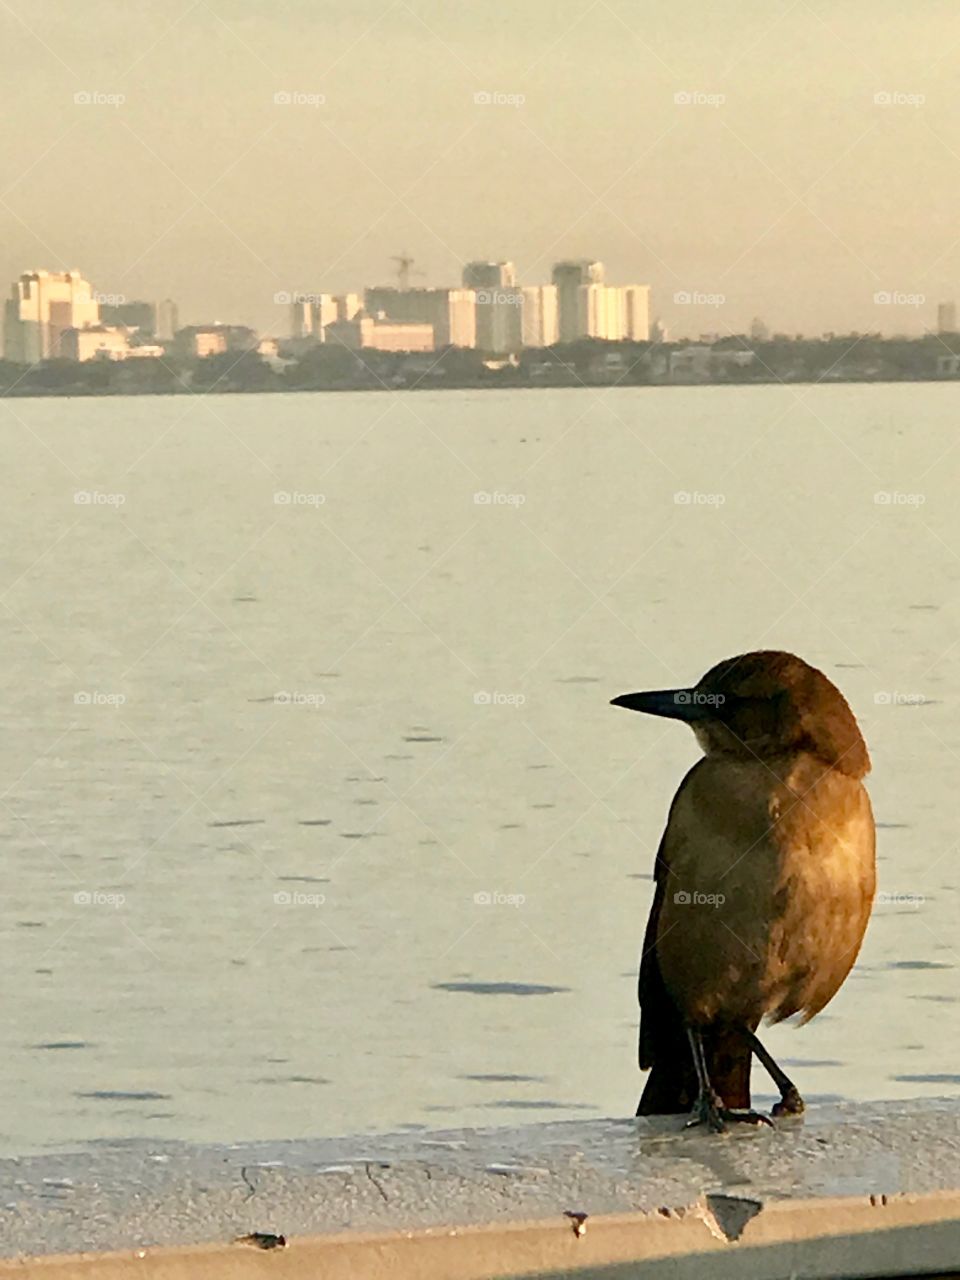 Bird and a city by the water on back ground.